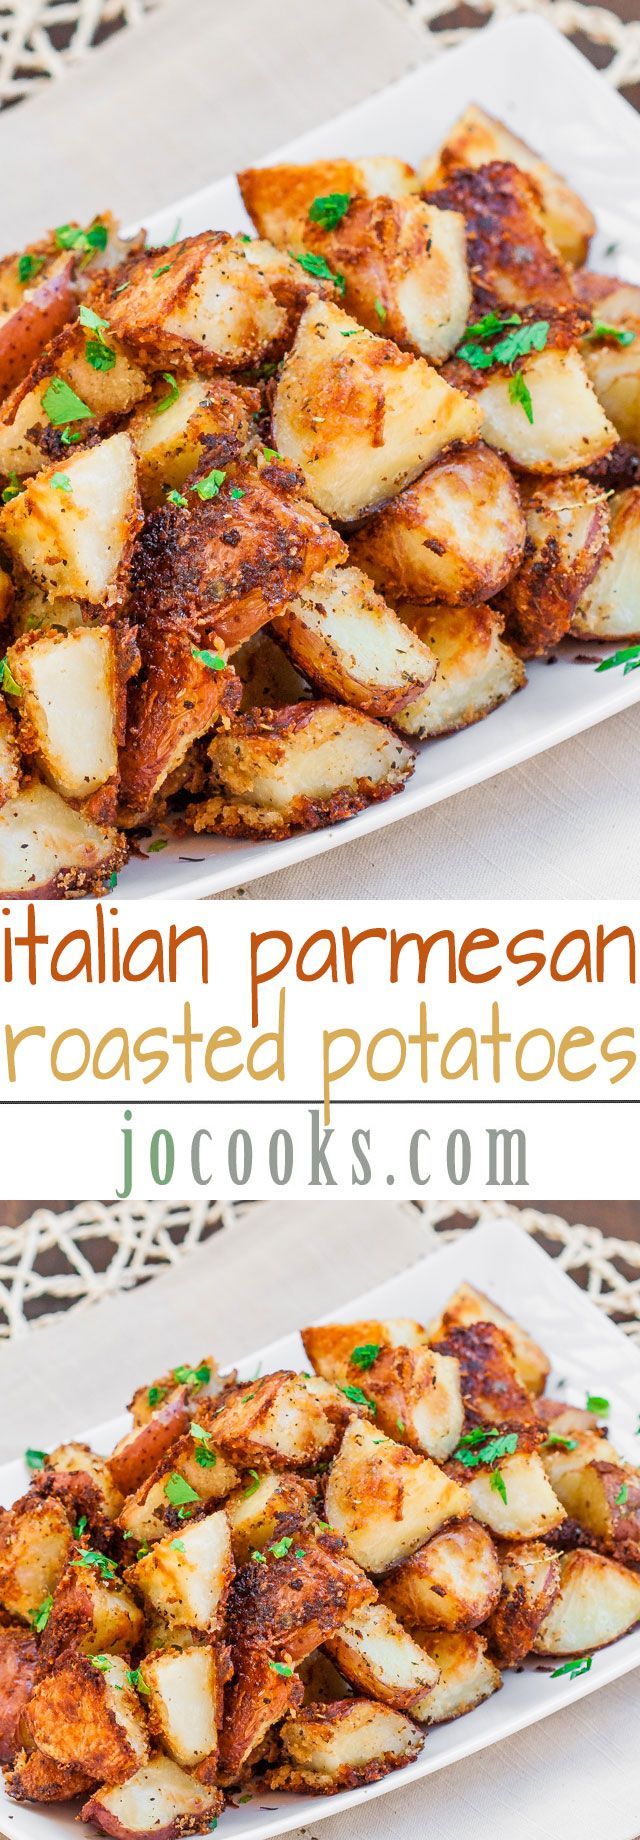 Italian Parmesan Roasted Potatoes – full of flavor and deliciousness, all you have to do is enjoy them.